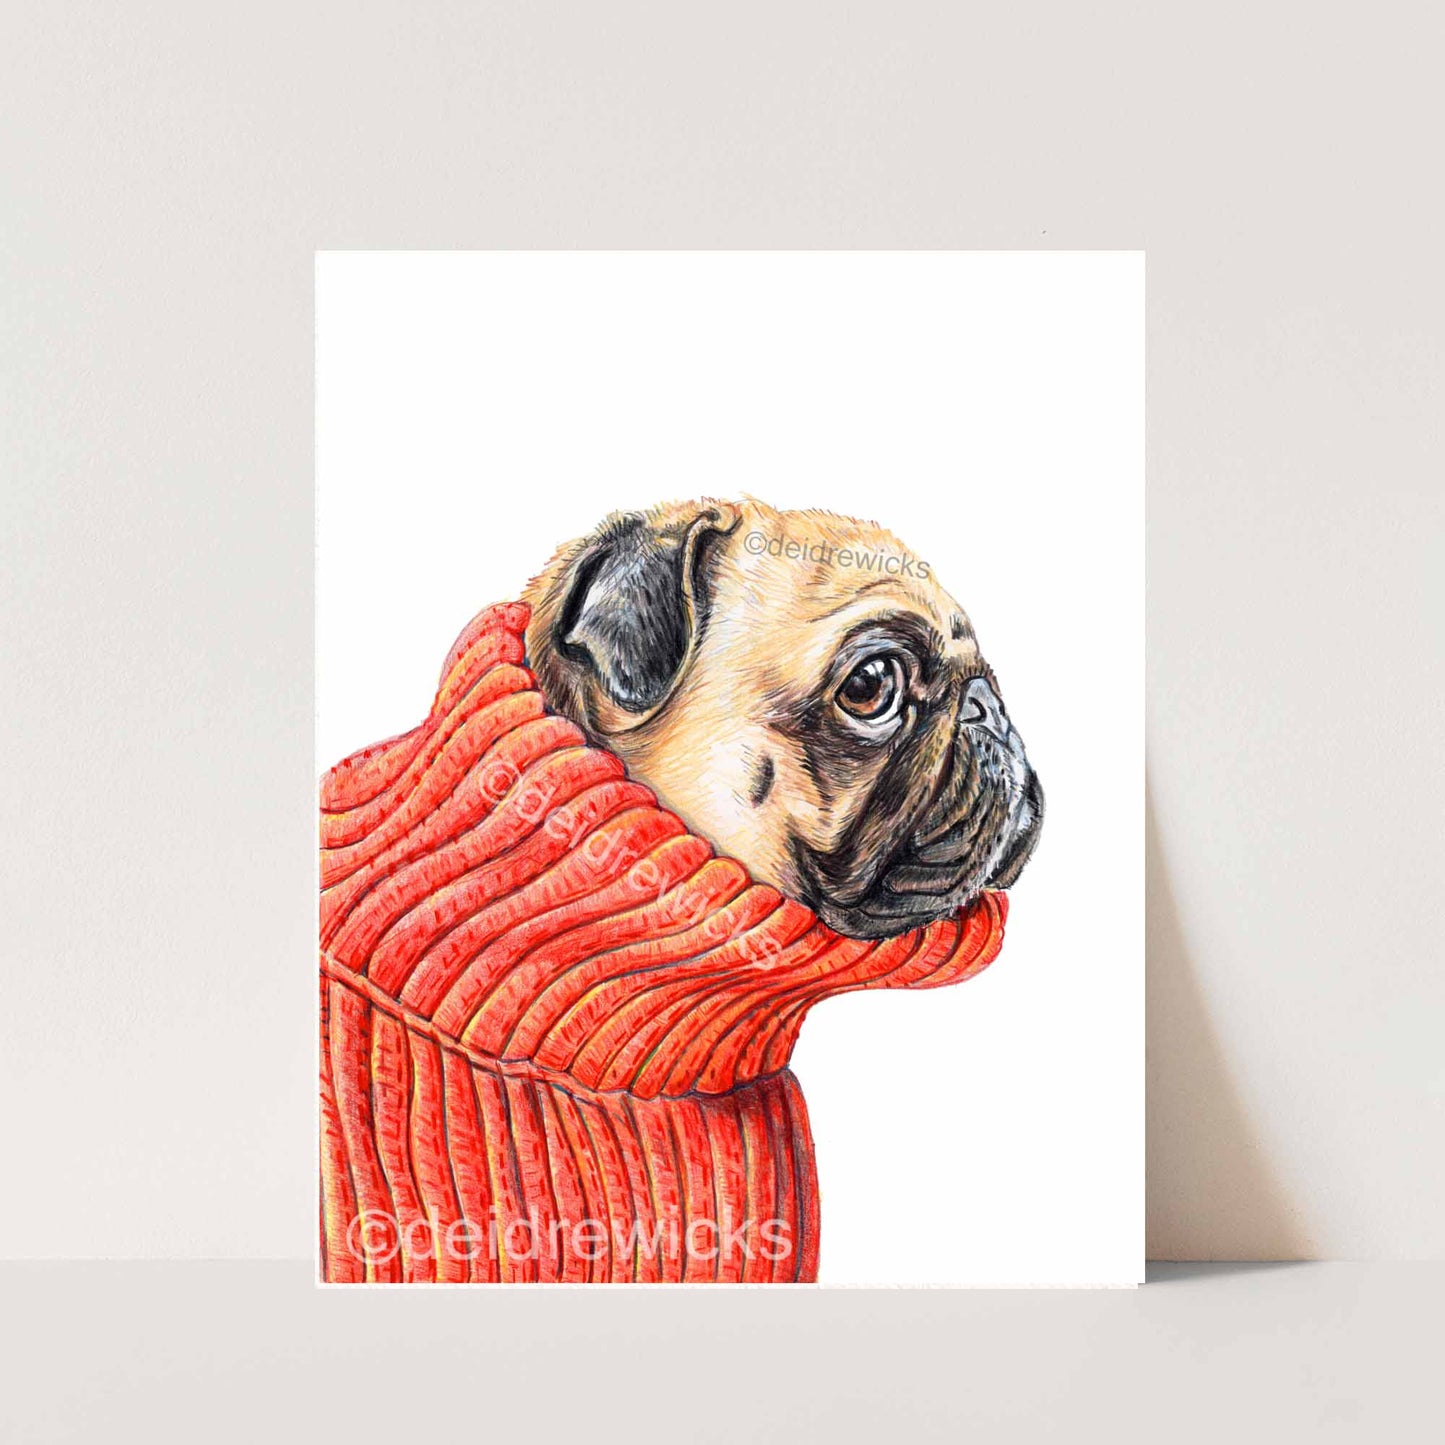 Coloured pencil drawing of a pug dog in profile wearing a red turtleneck sweater by Deidre Wicks